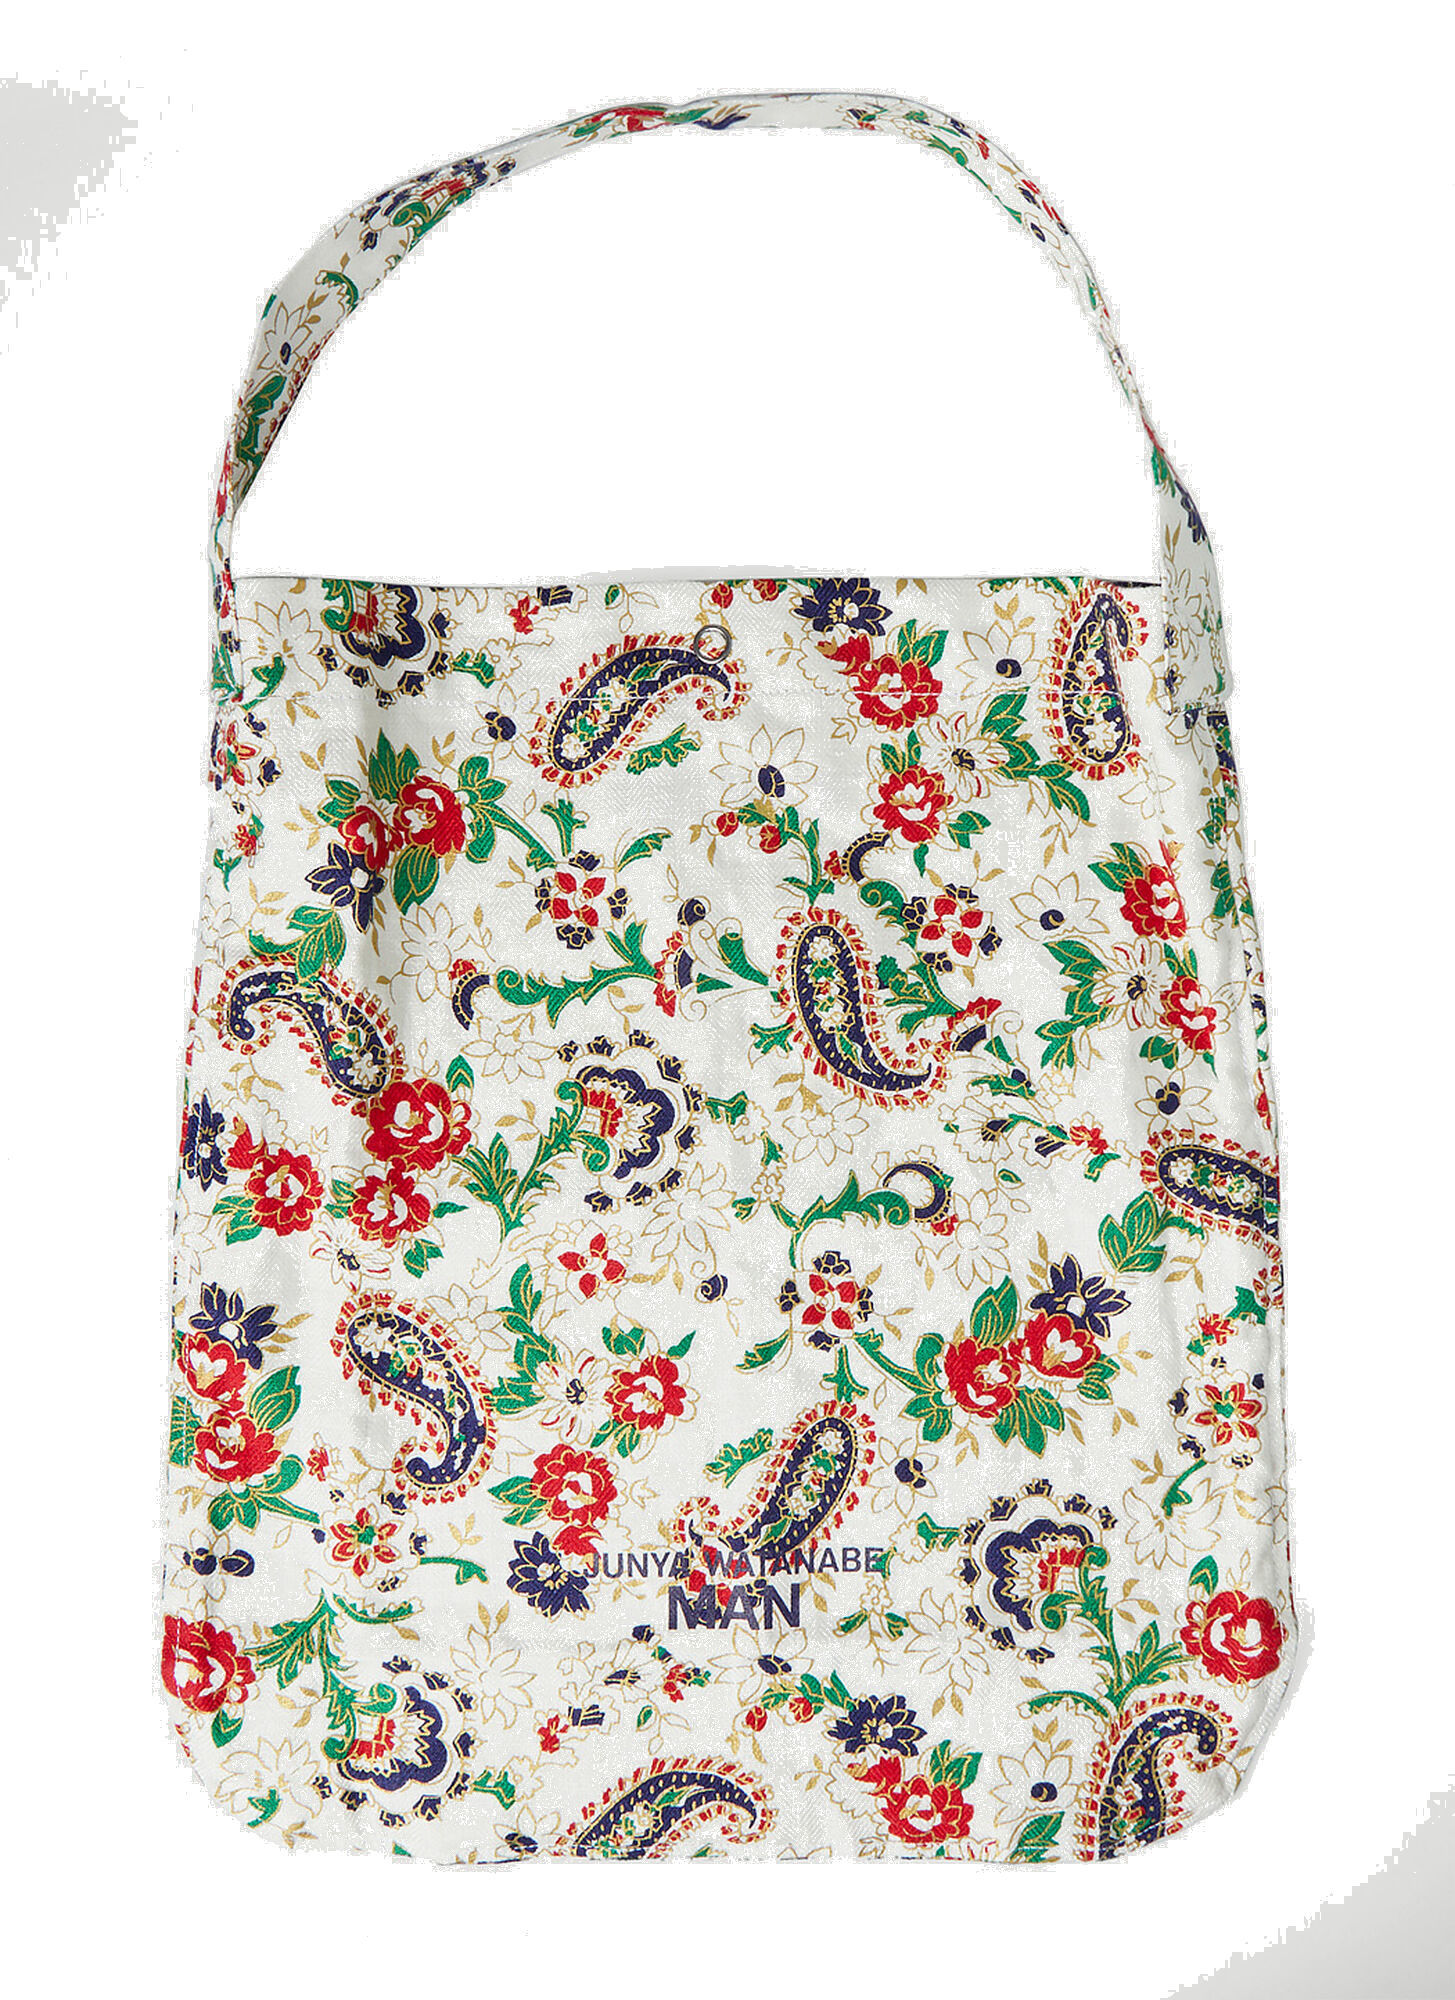 Photo: Paisley Tote Bag in White